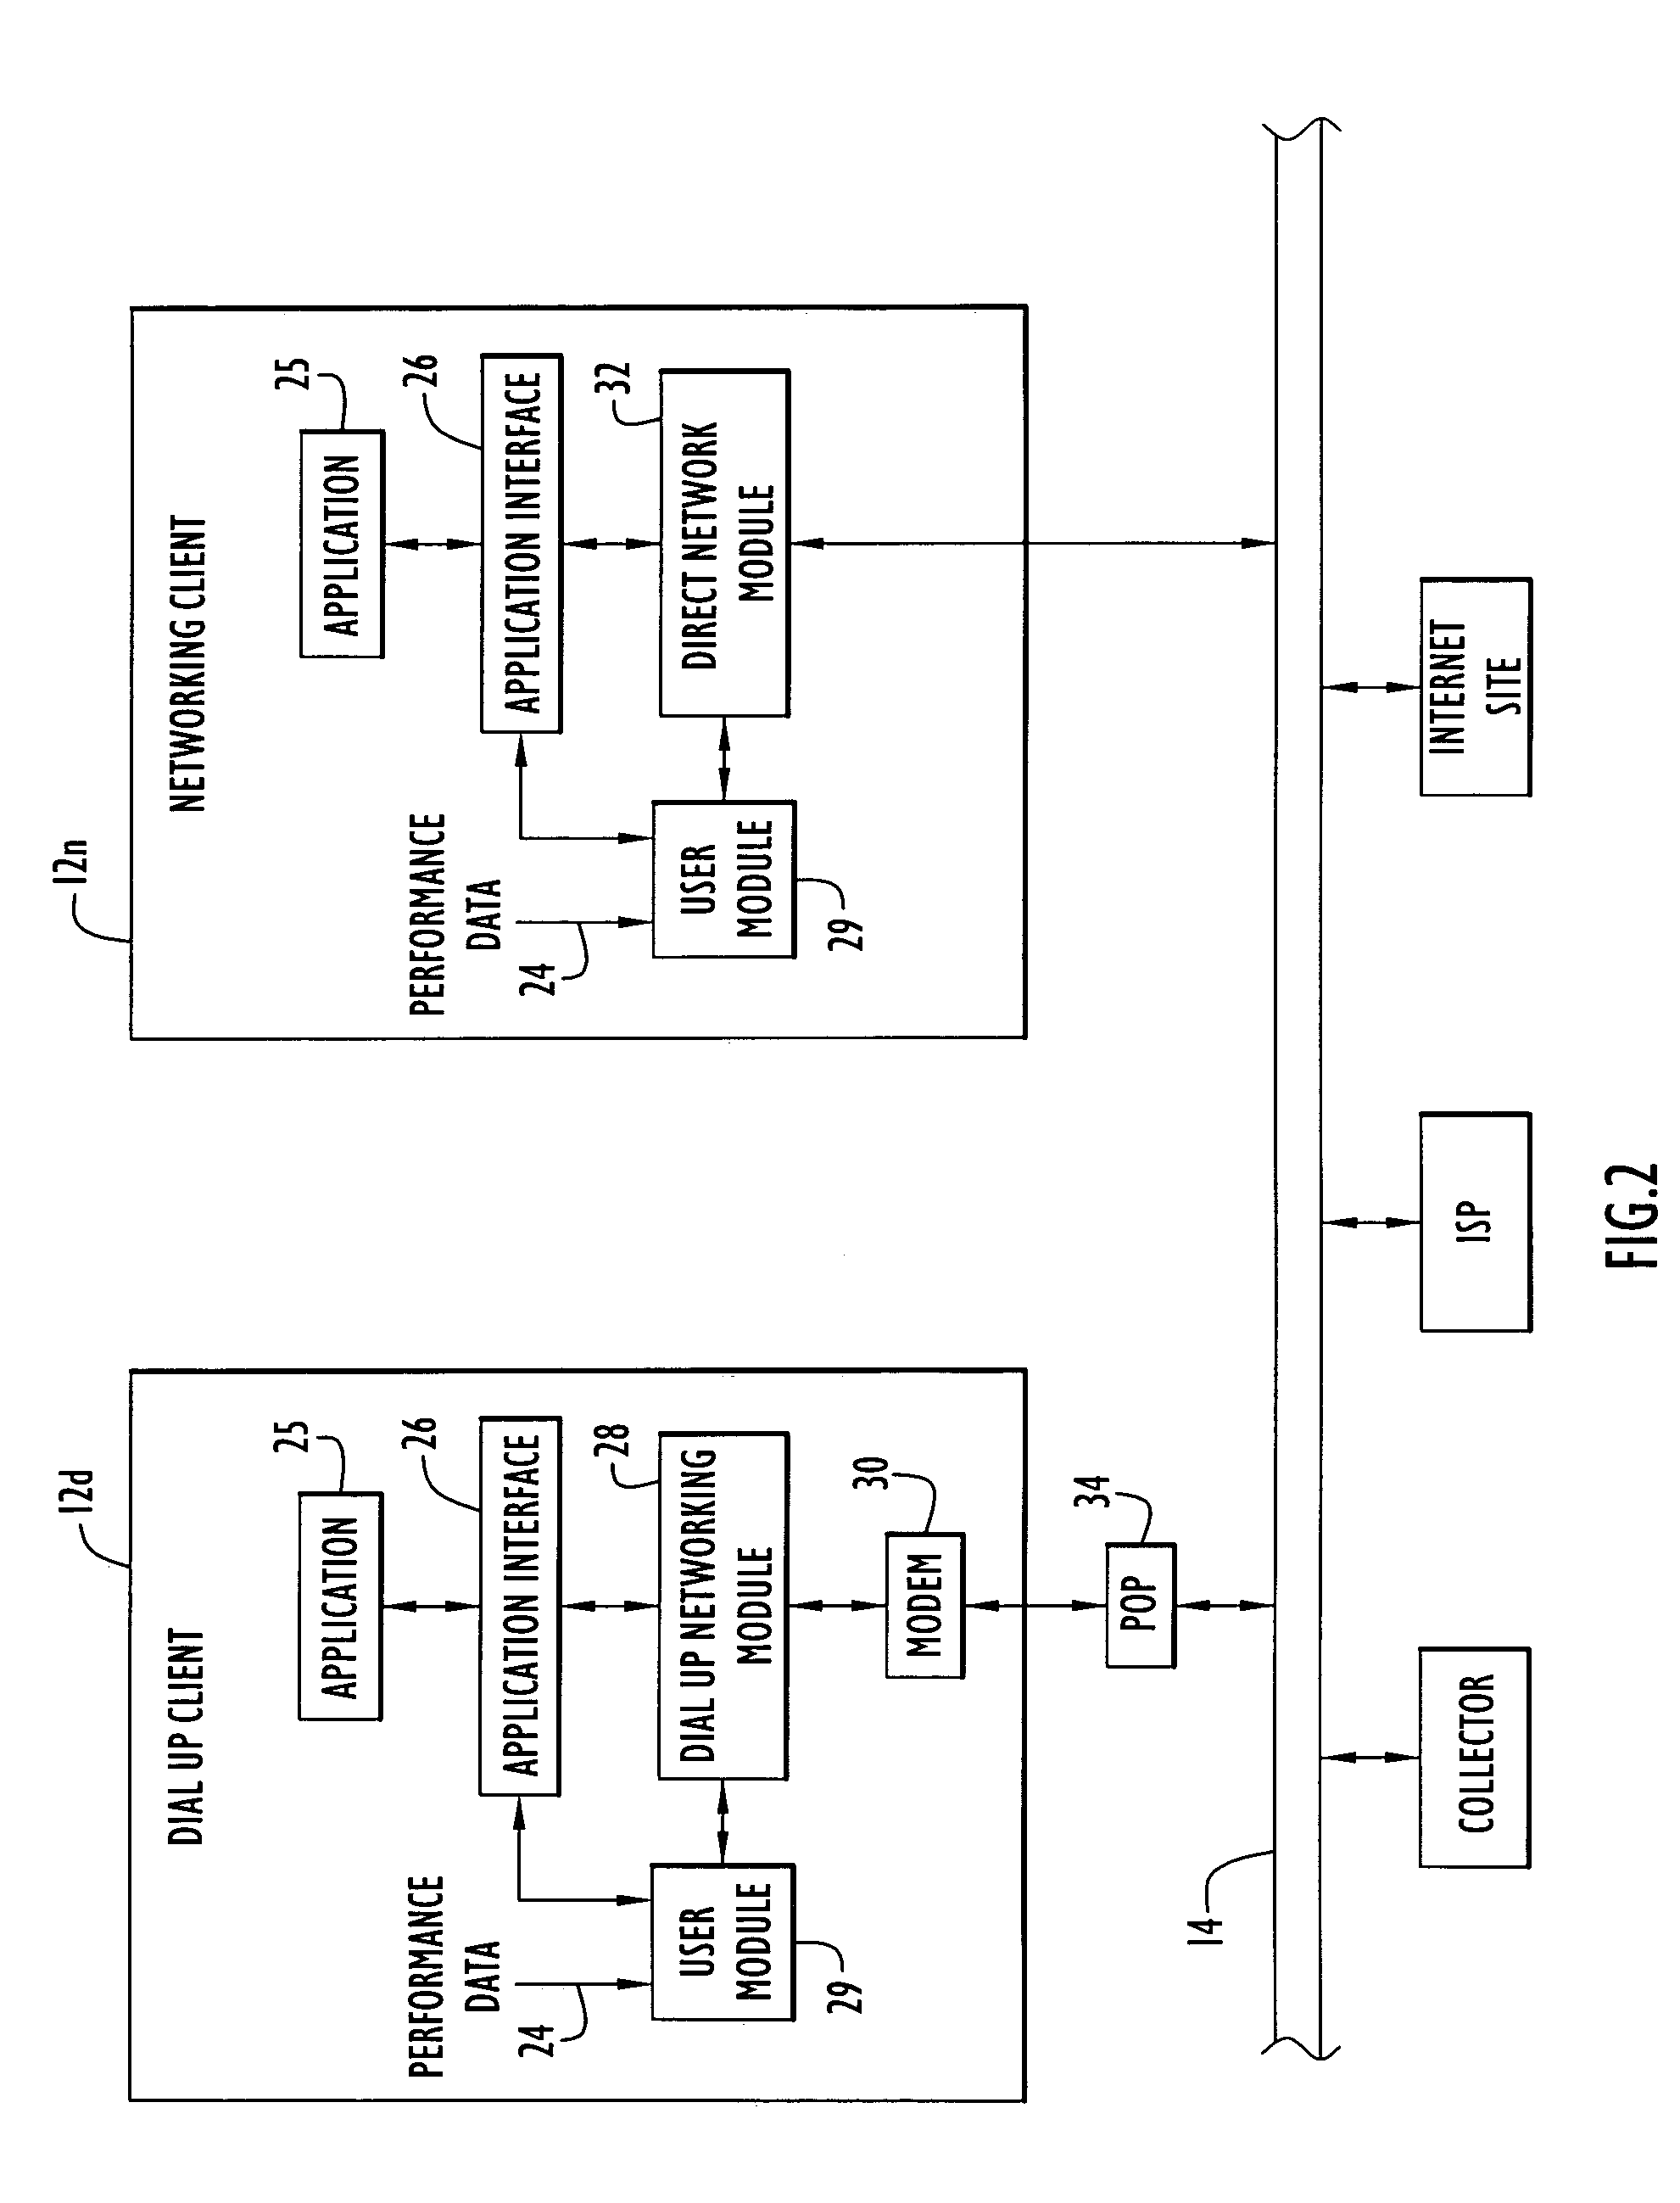 Methods and apparatus for monitoring end-user experience in a distributed network